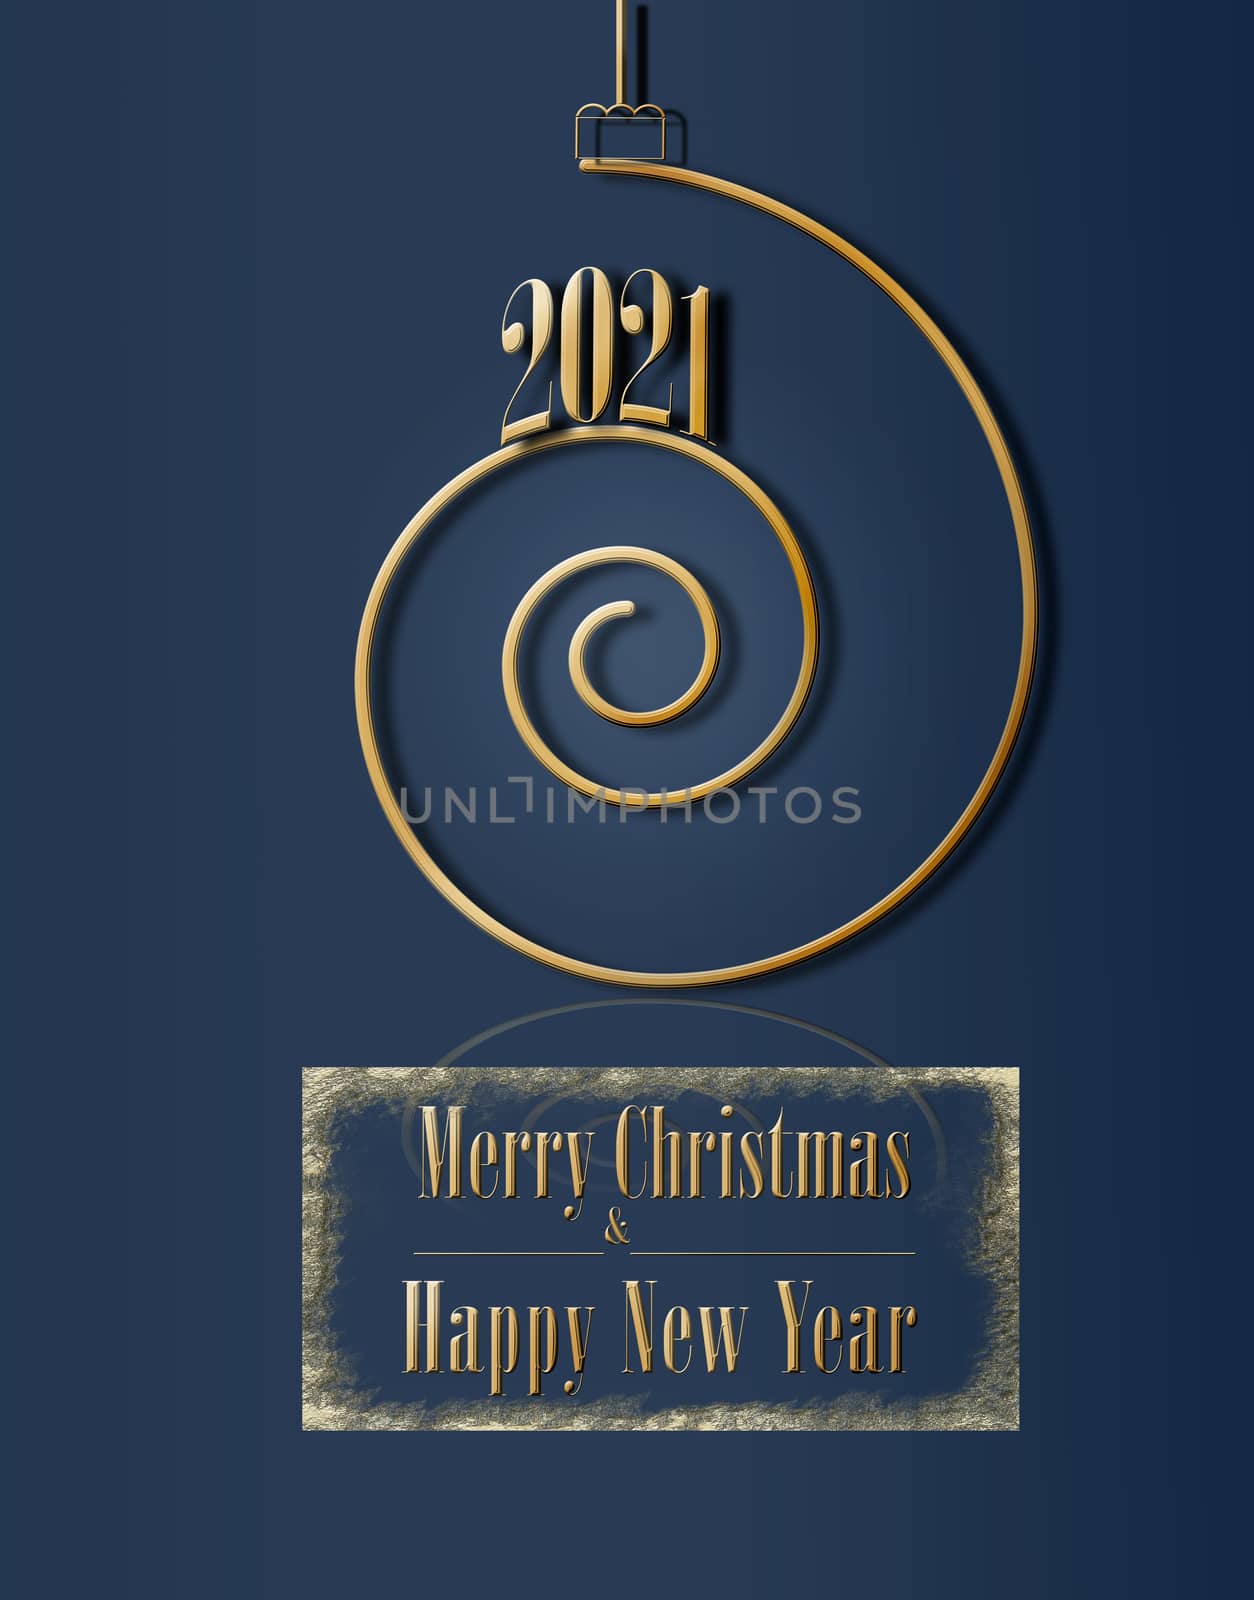 Luxury elegant minimalist 2021 Christmas greeting card. 3D illustration. Golden shiny glitter 2021 spiral on dark blue background, text Merry Christmas and Happy New Year. Mock up, banner, invitation.